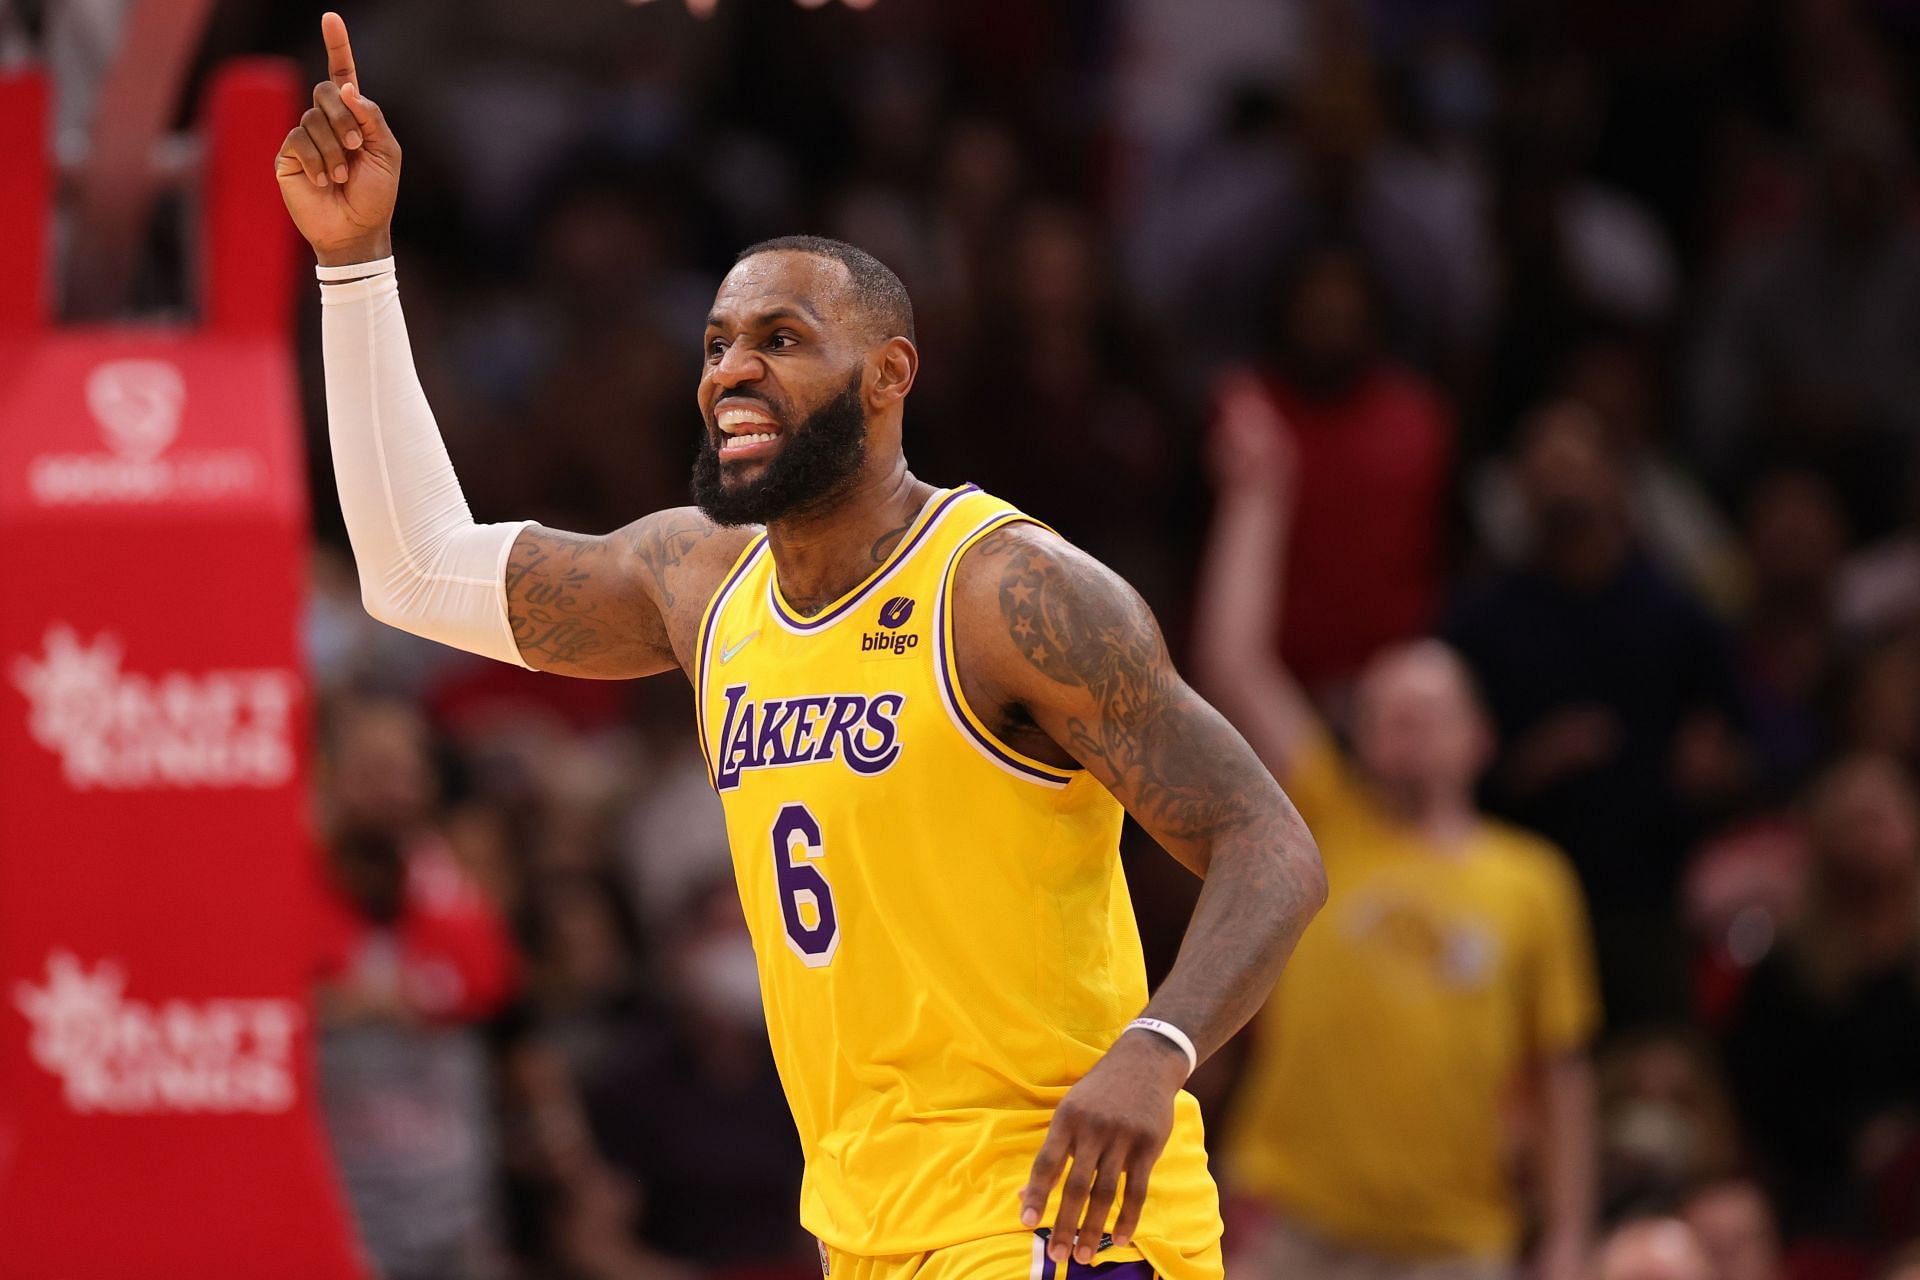 LeBron James #6 of the Los Angeles Lakers reacts to a call during the second half against the Houston Rockets at Toyota Center on December 28, 2021 in Houston, Texas.